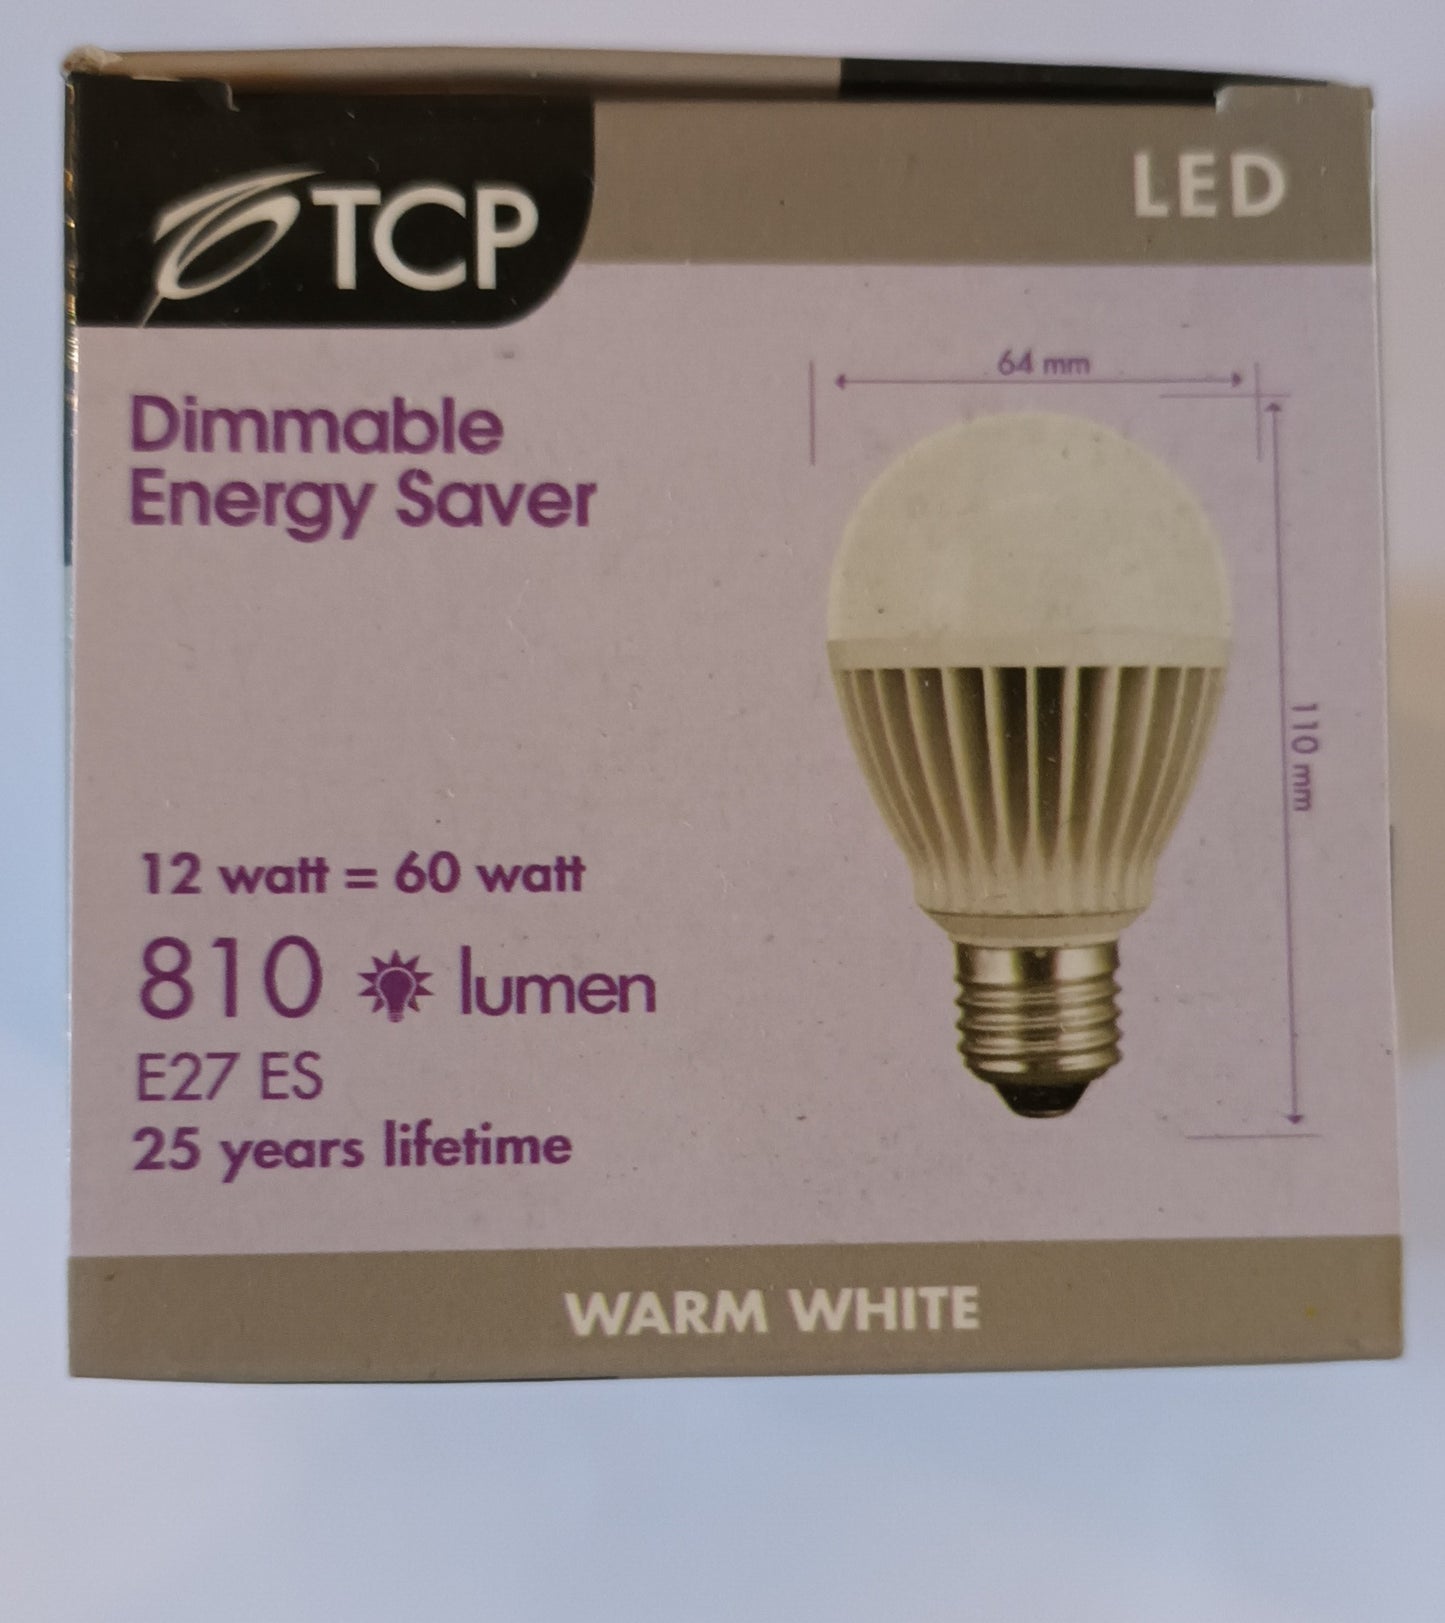 GLS LED 12w es dimmable warm white energy saver